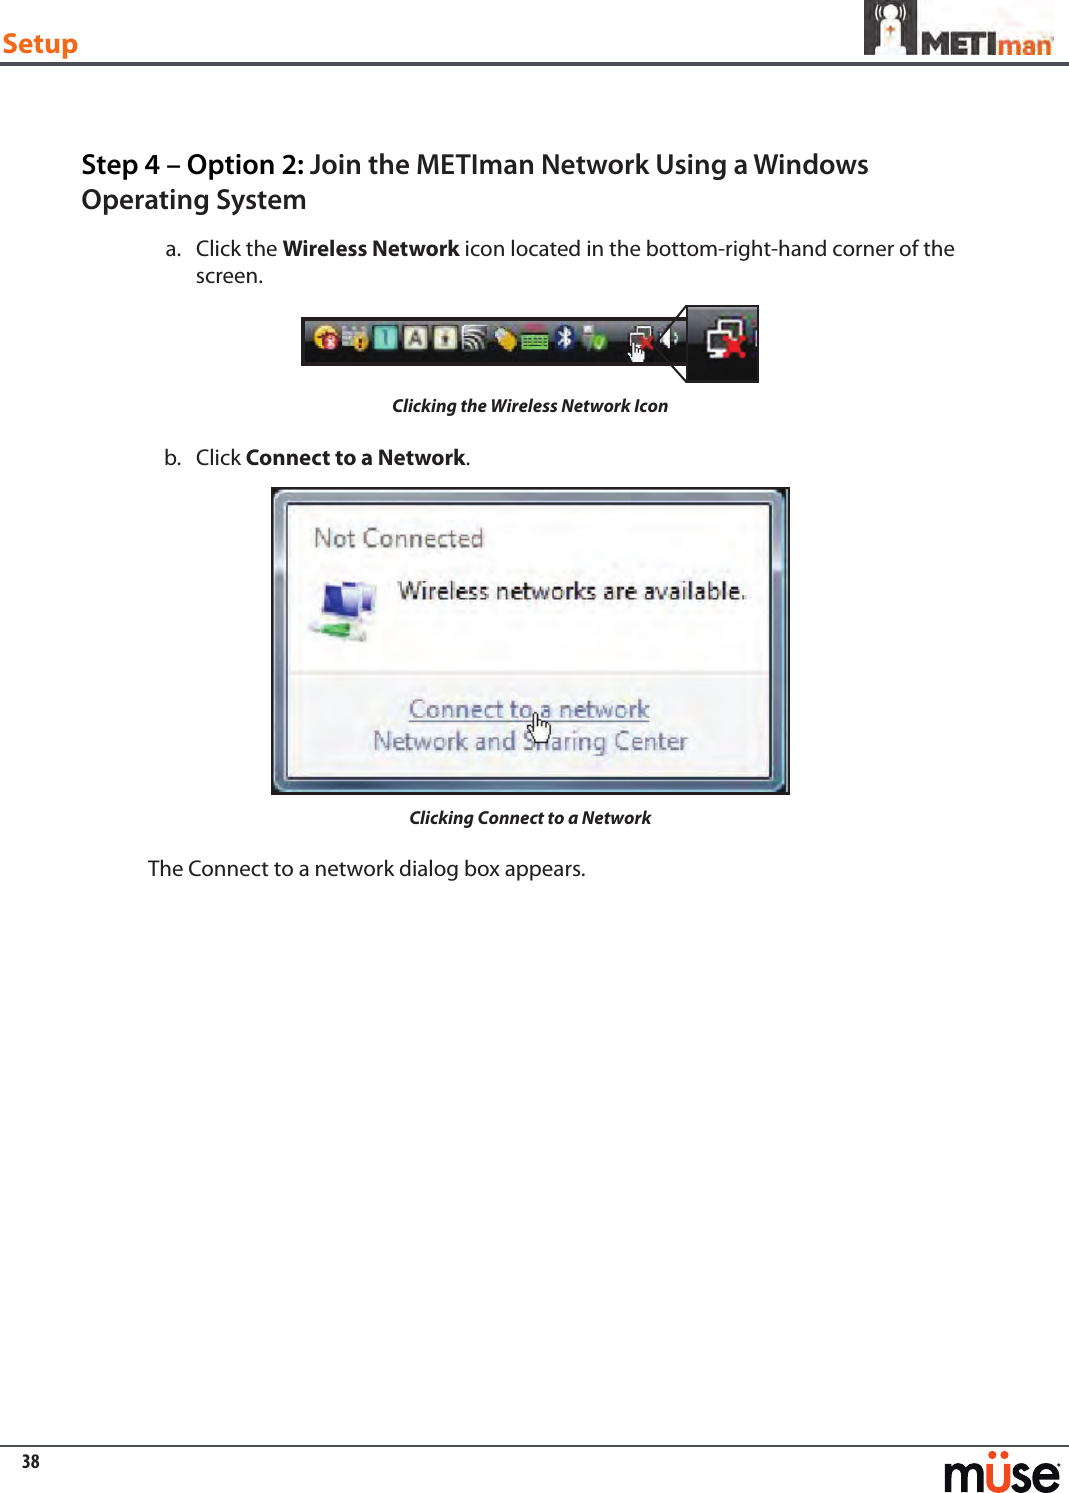 38SetupStep 4 – Option 2: Join the METIman Network Using a Windows Operating SystemClick the a.  Wireless Network icon located in the bottom-right-hand corner of the screen.Clicking the Wireless Network IconClick b.  Connect to a Network.Clicking Connect to a NetworkThe Connect to a network dialog box appears.